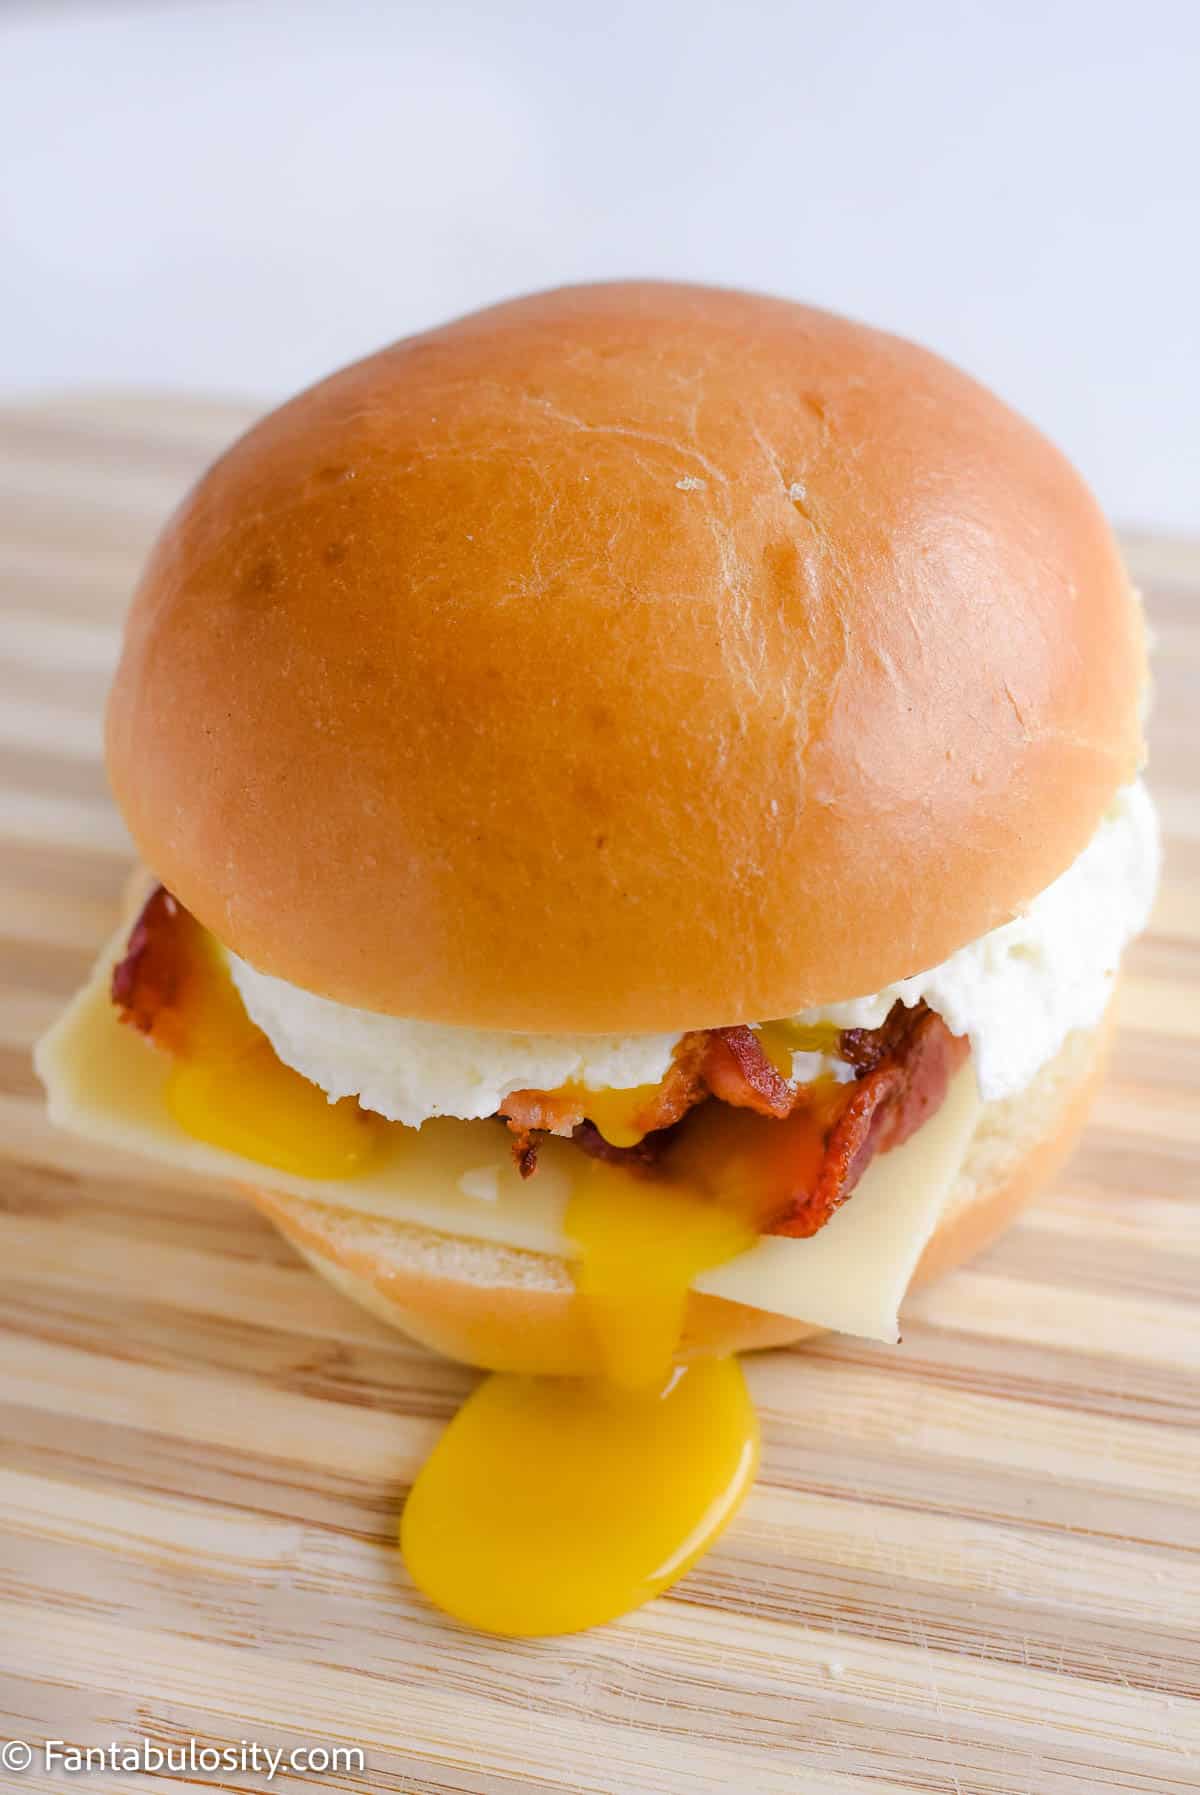 Bacon egg and cheese sandwich